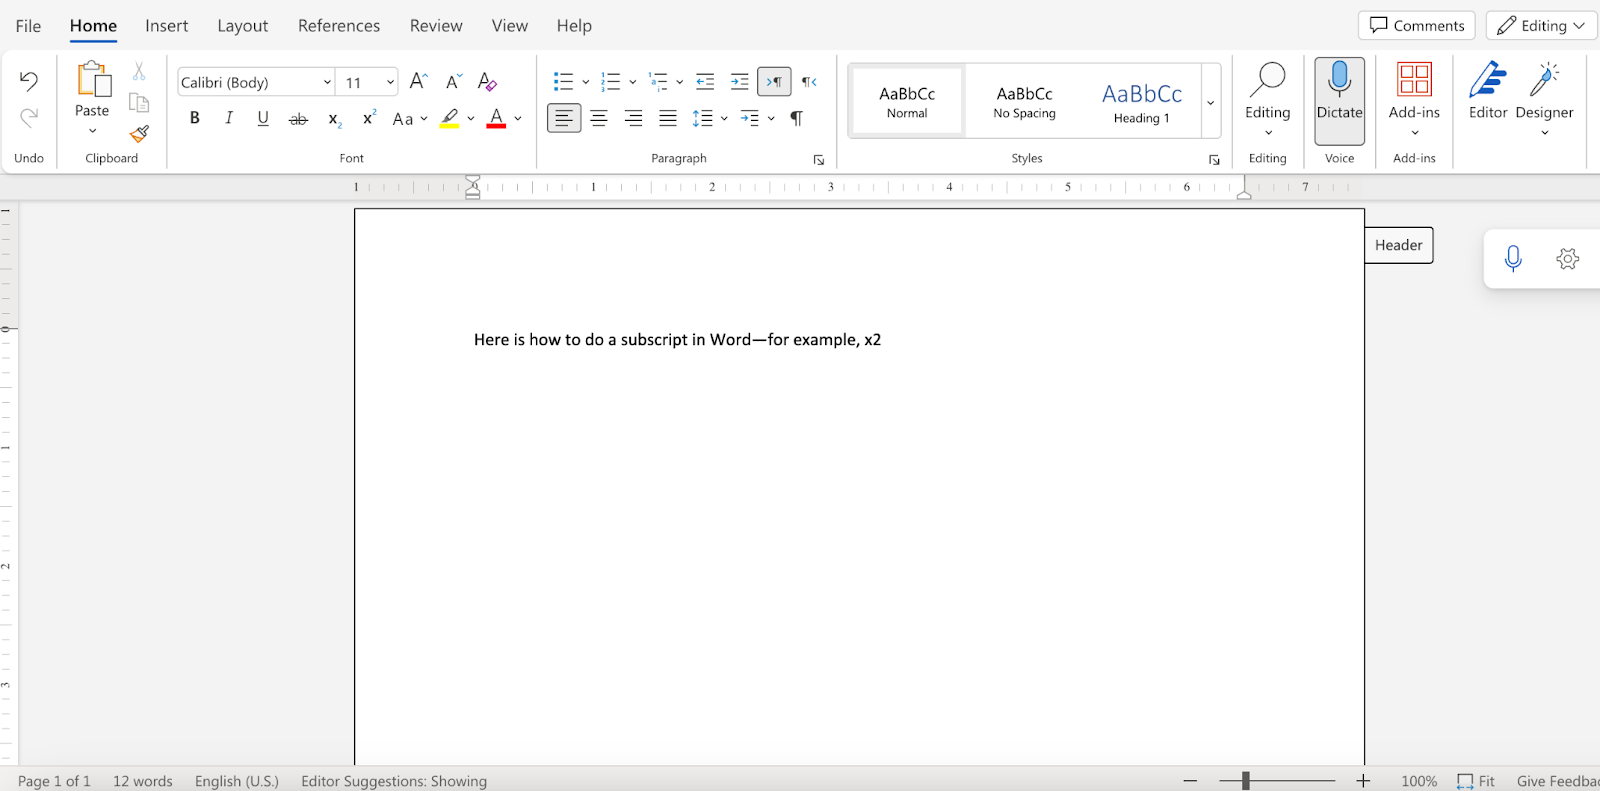 Open a new document in Word, and type the text you’d like to format.